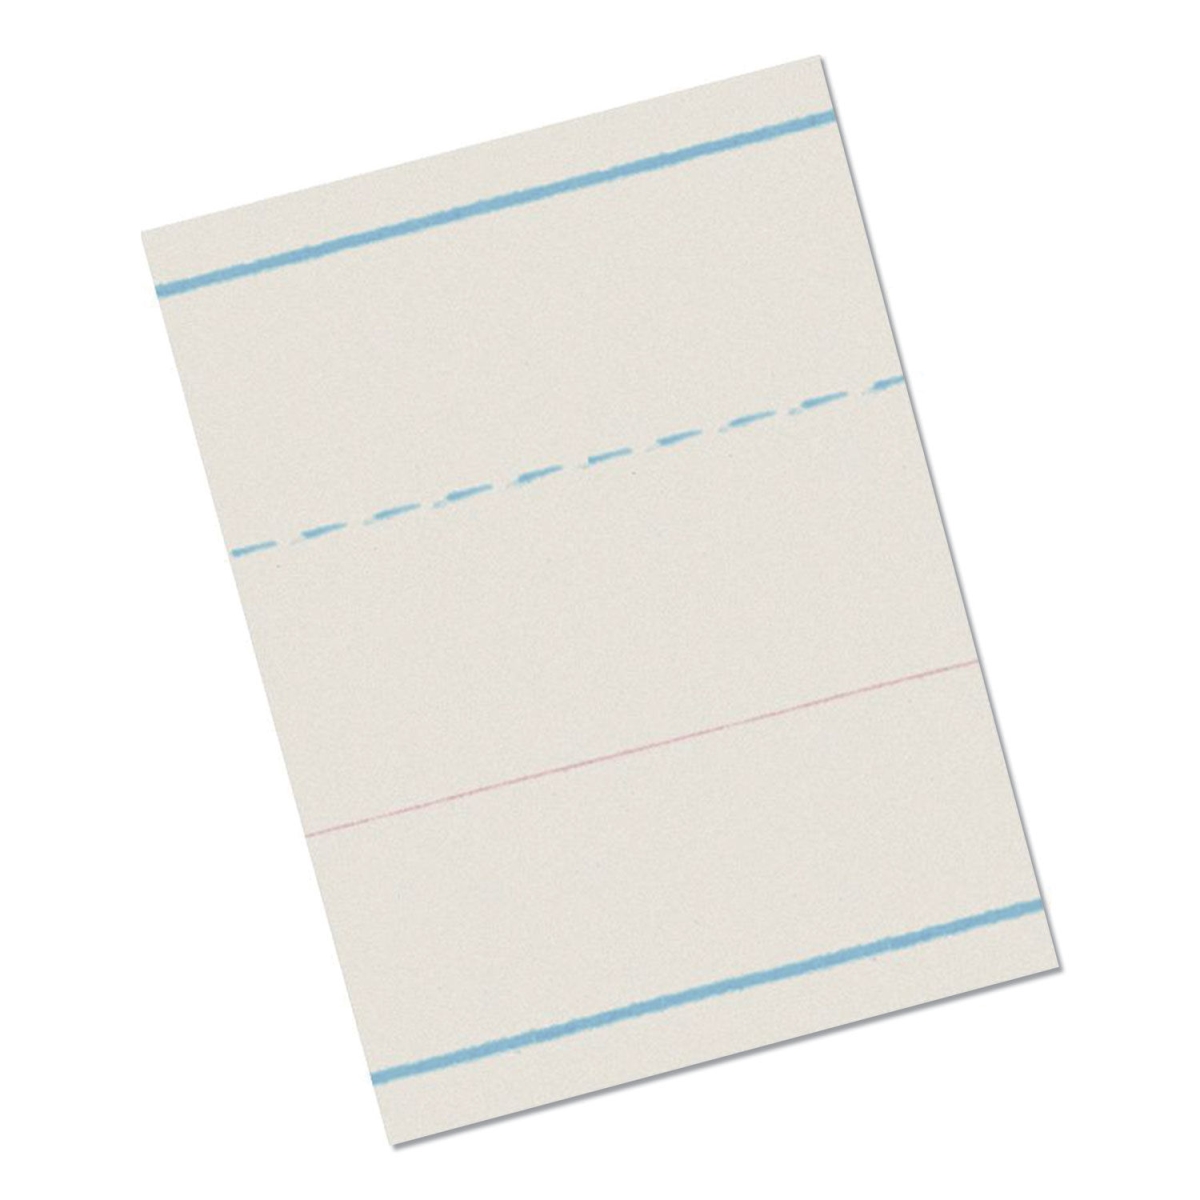 Picture of Pacon ZP2610 8 x 10.5 in. Multi-Program Handwriting Paper, White